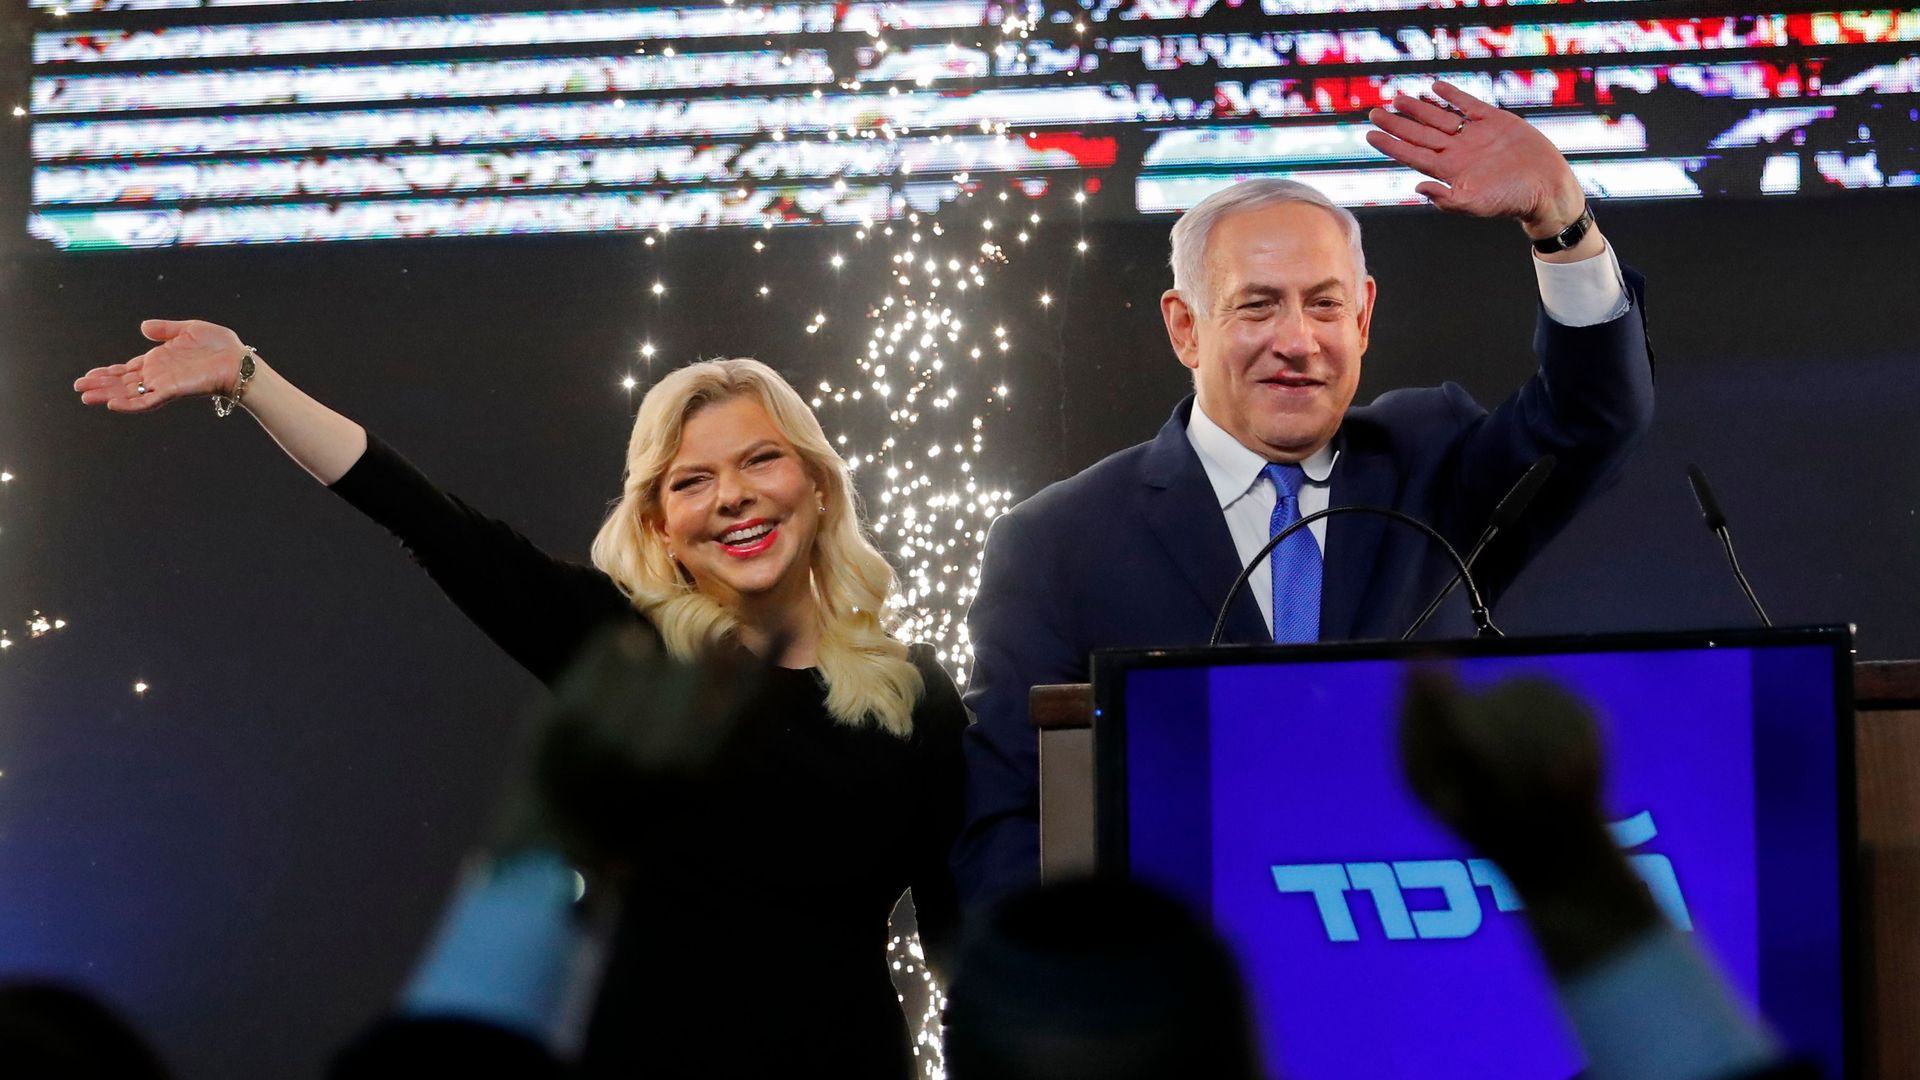 Benjamin Netanyahu and his wife, Sara, on stage before supporters